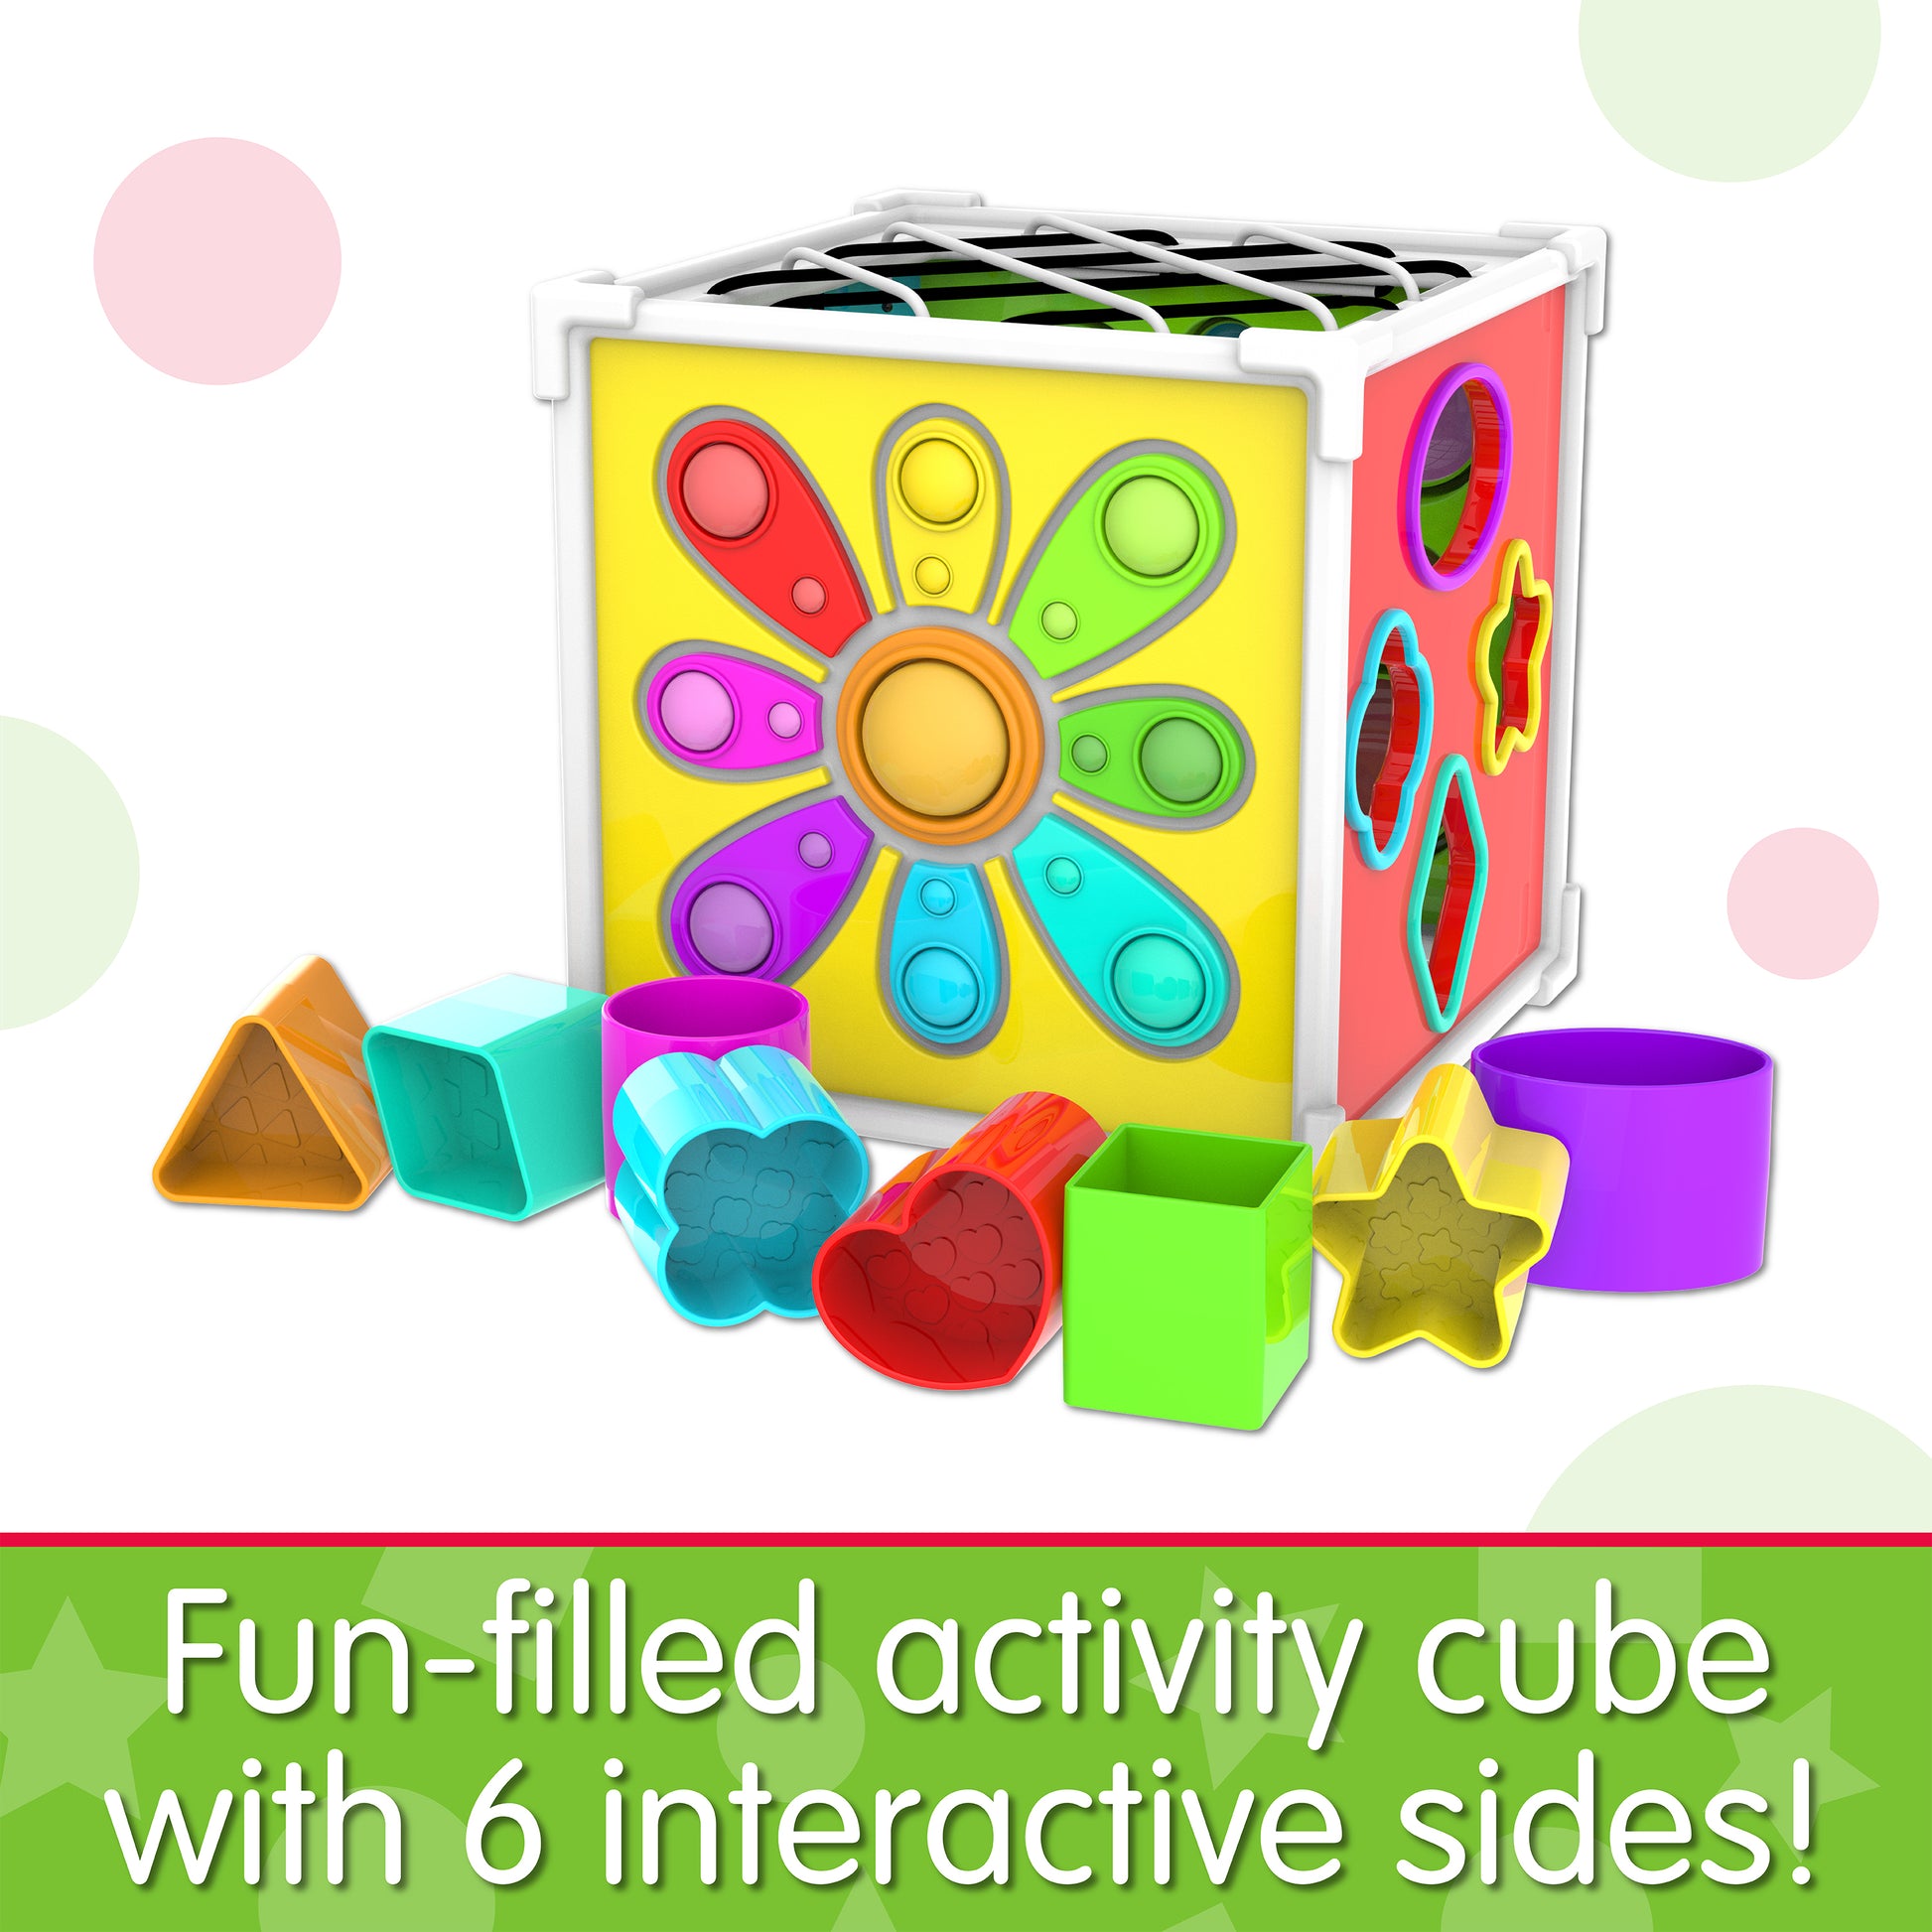 Infographic about Pop and Discover Activity Cube that says, "Fun-filled activity cube with 6 interactive sides!"